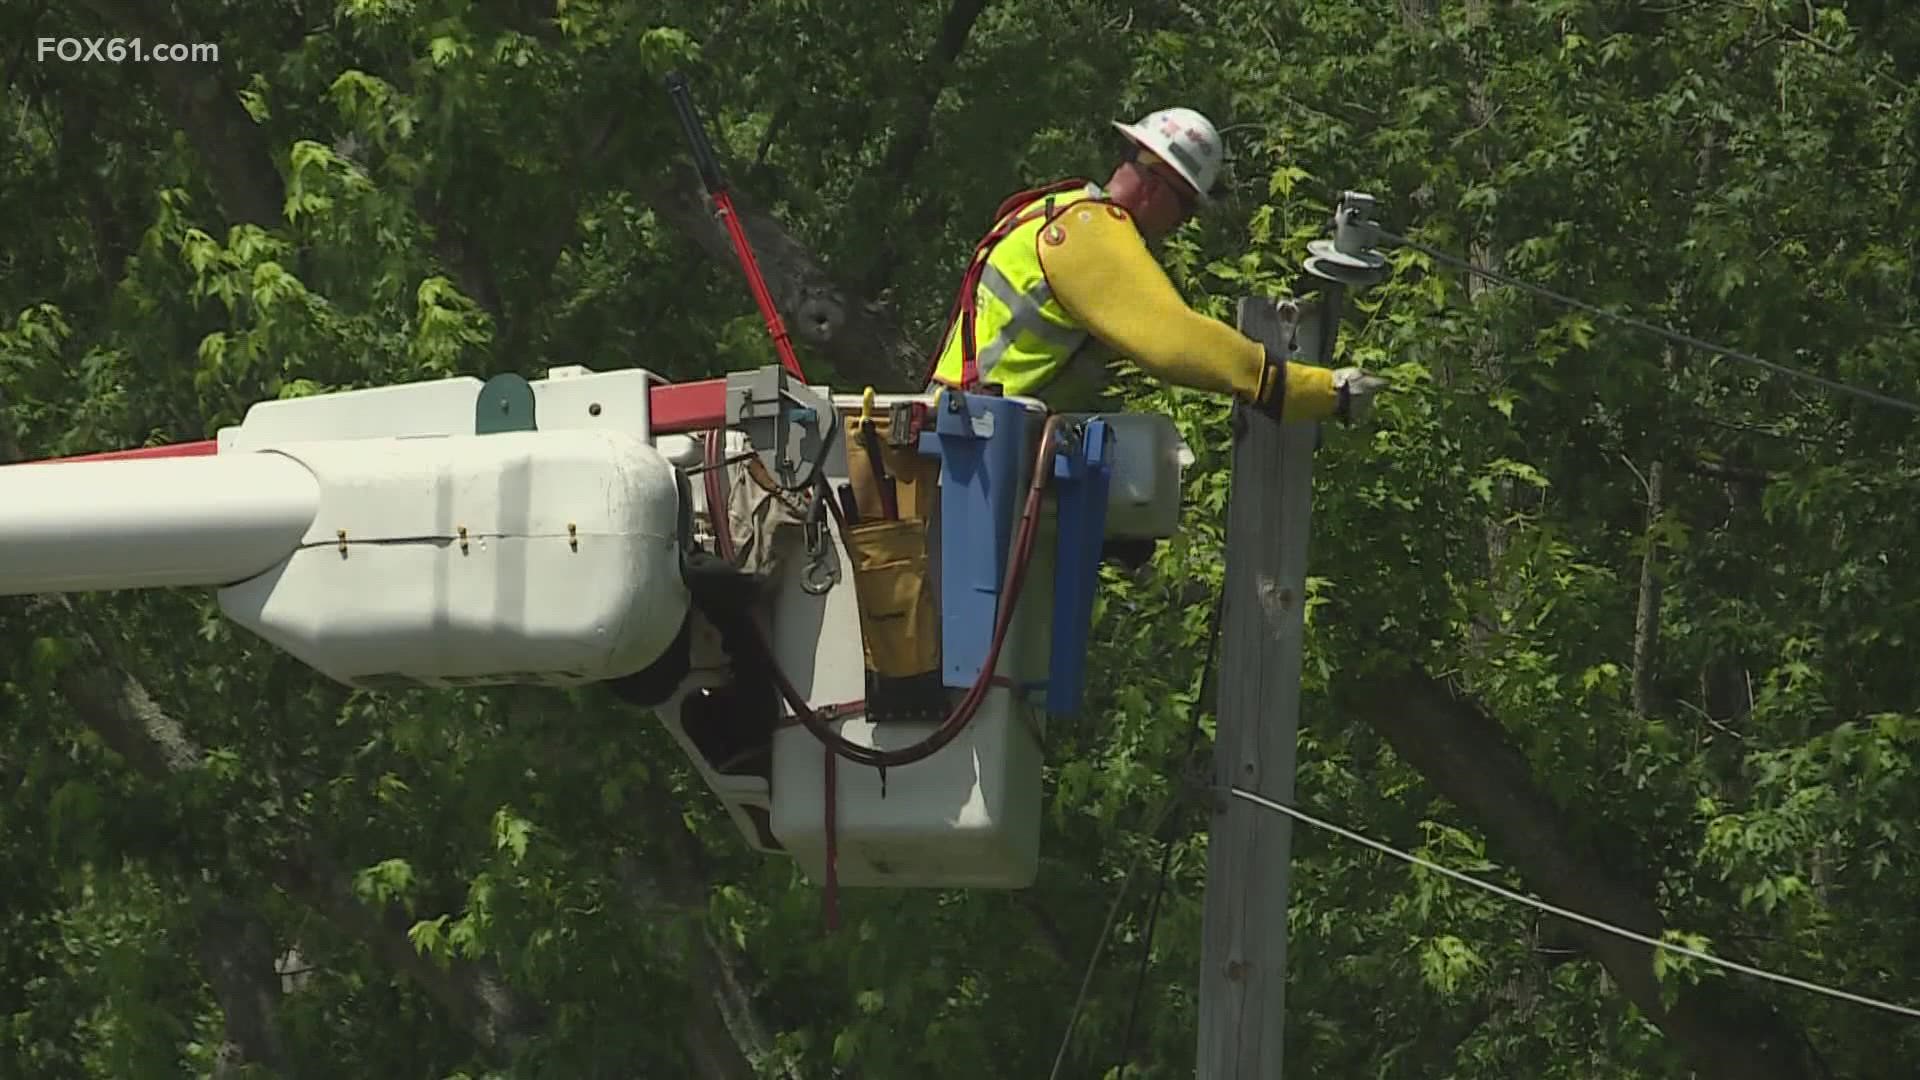 Eversource says the way they've been fixing damaged poles is safe and on point with regulations.